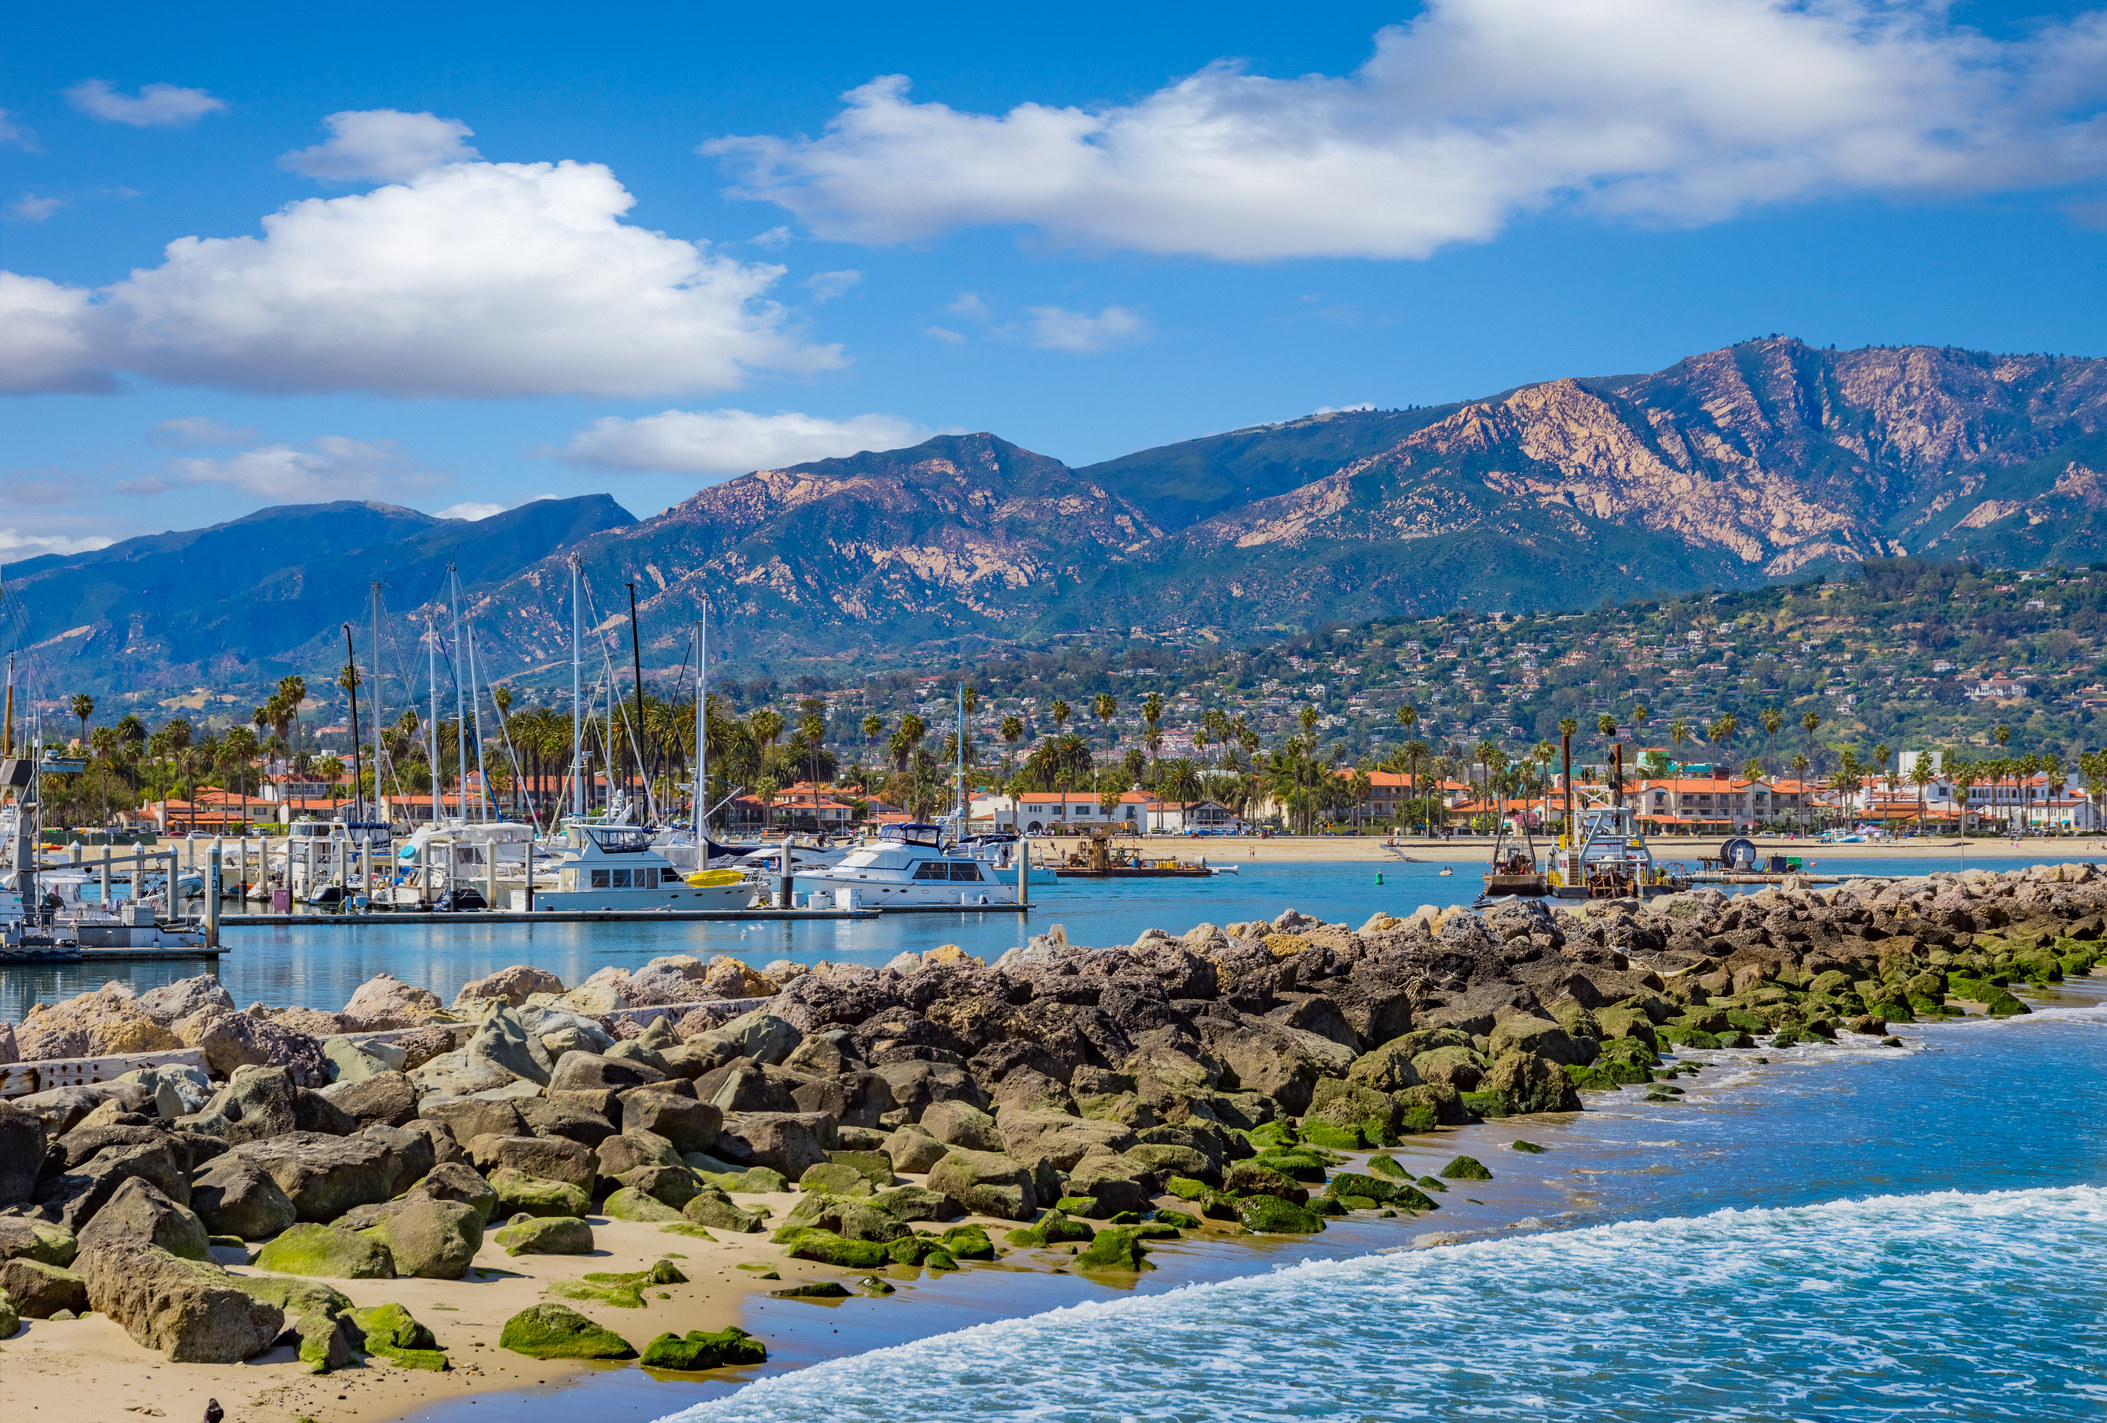 A beautiful marina in Santa Barbara, with the ocean and mountains clearly visible